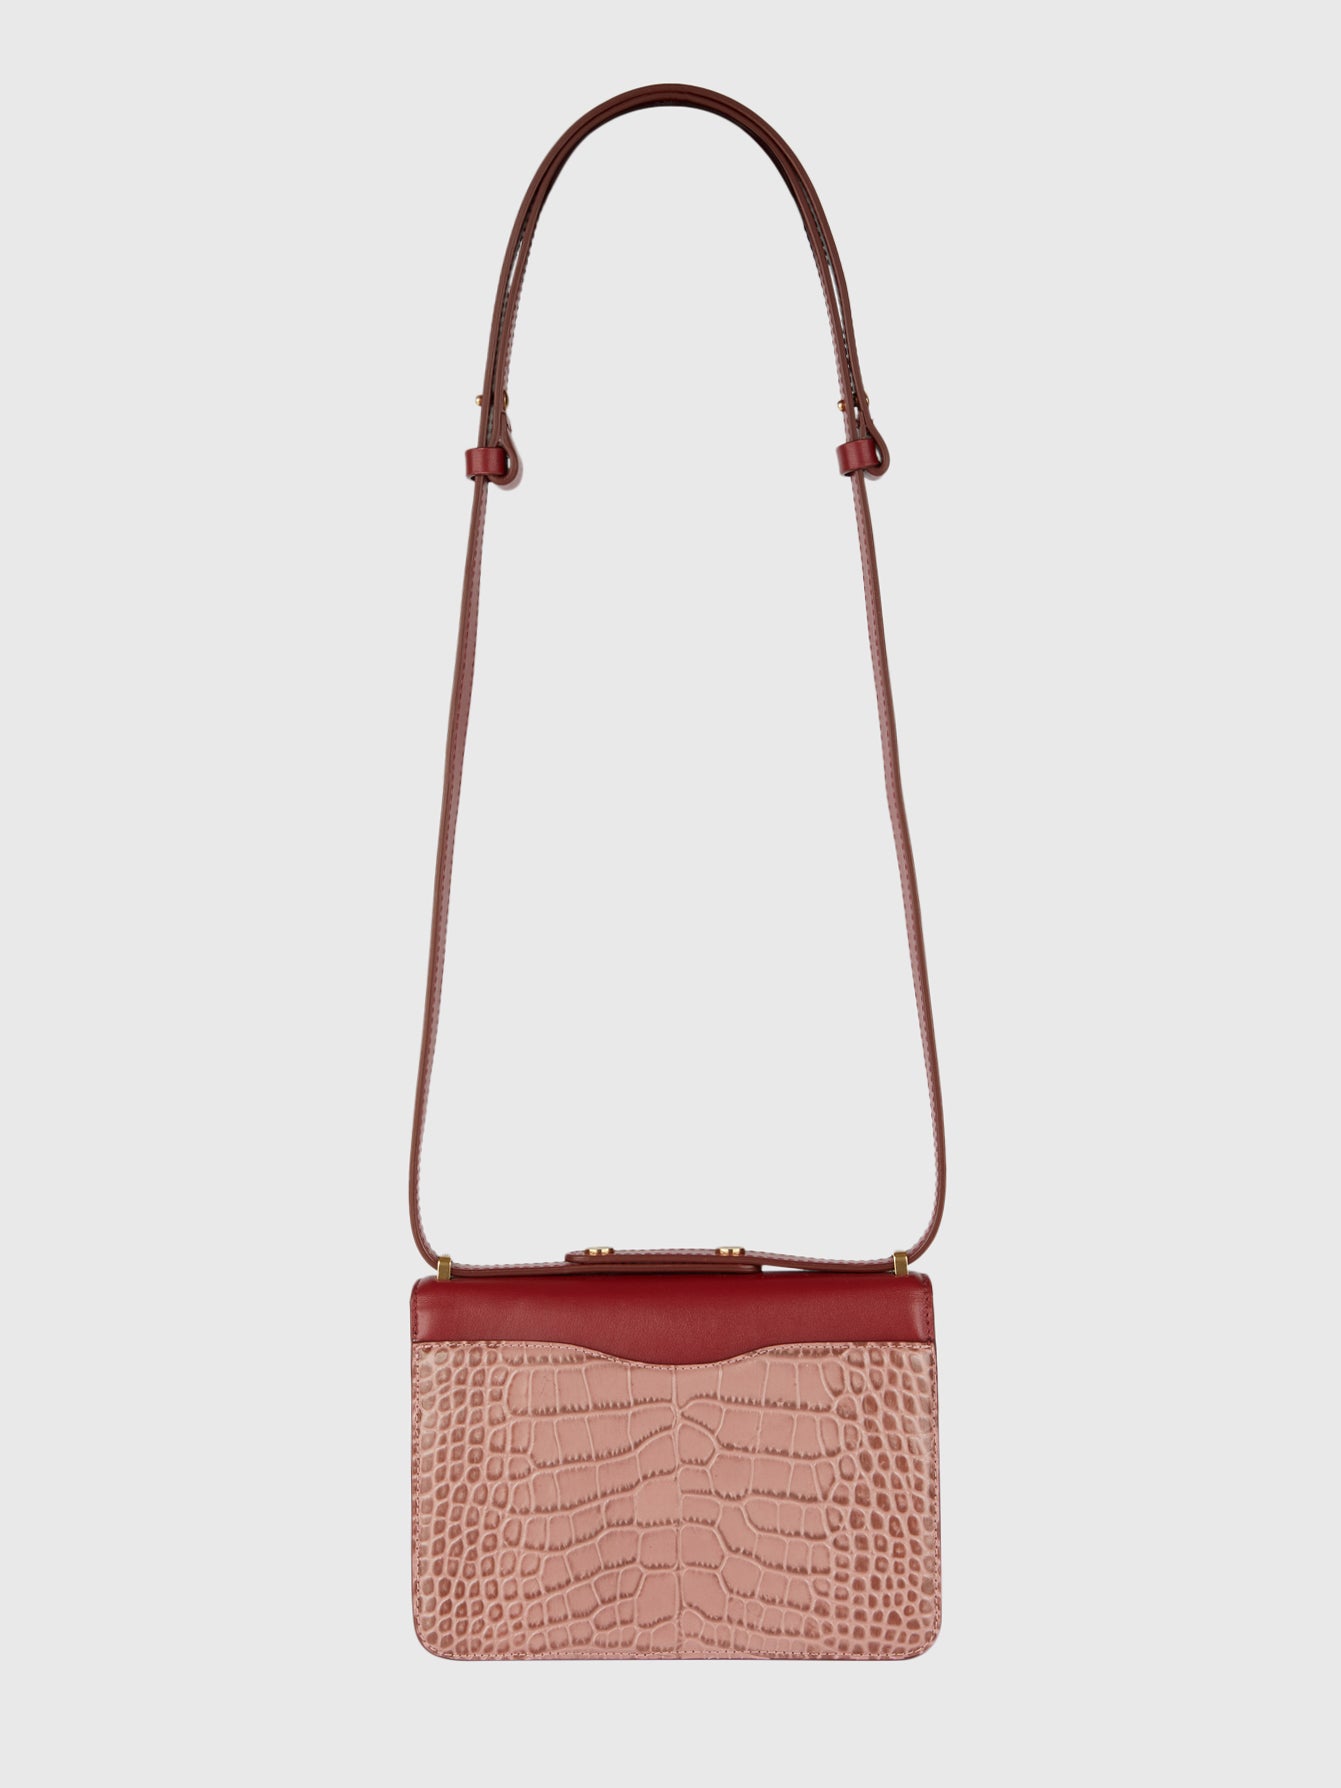 The Anika Bag In Red